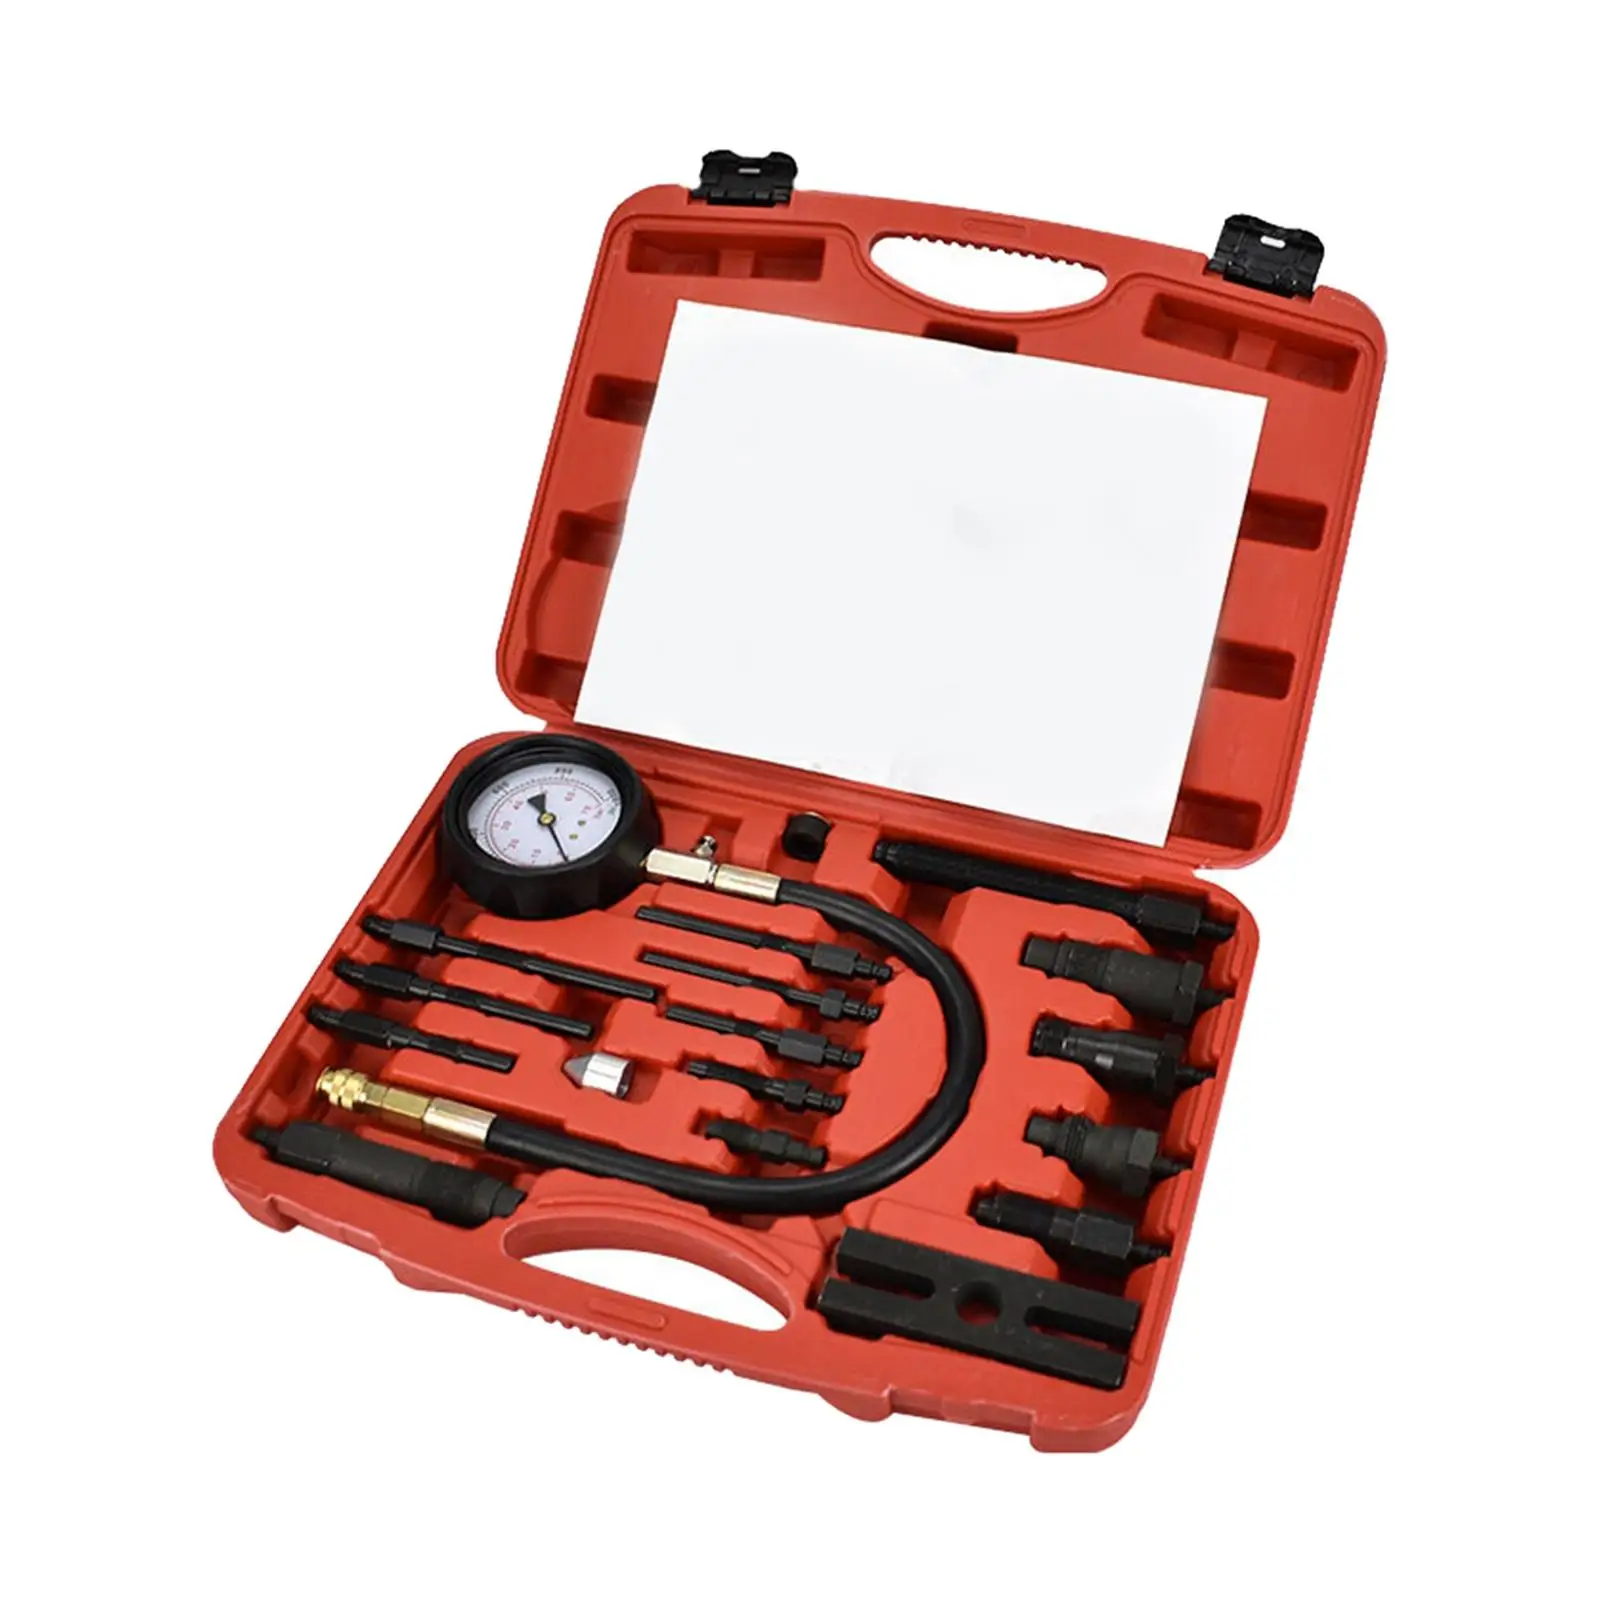 Set of 17 Diesel Engine Cylinder Compression Tester Tool, Quick Release Push Button Valve Accessories Widely Application Kit Set